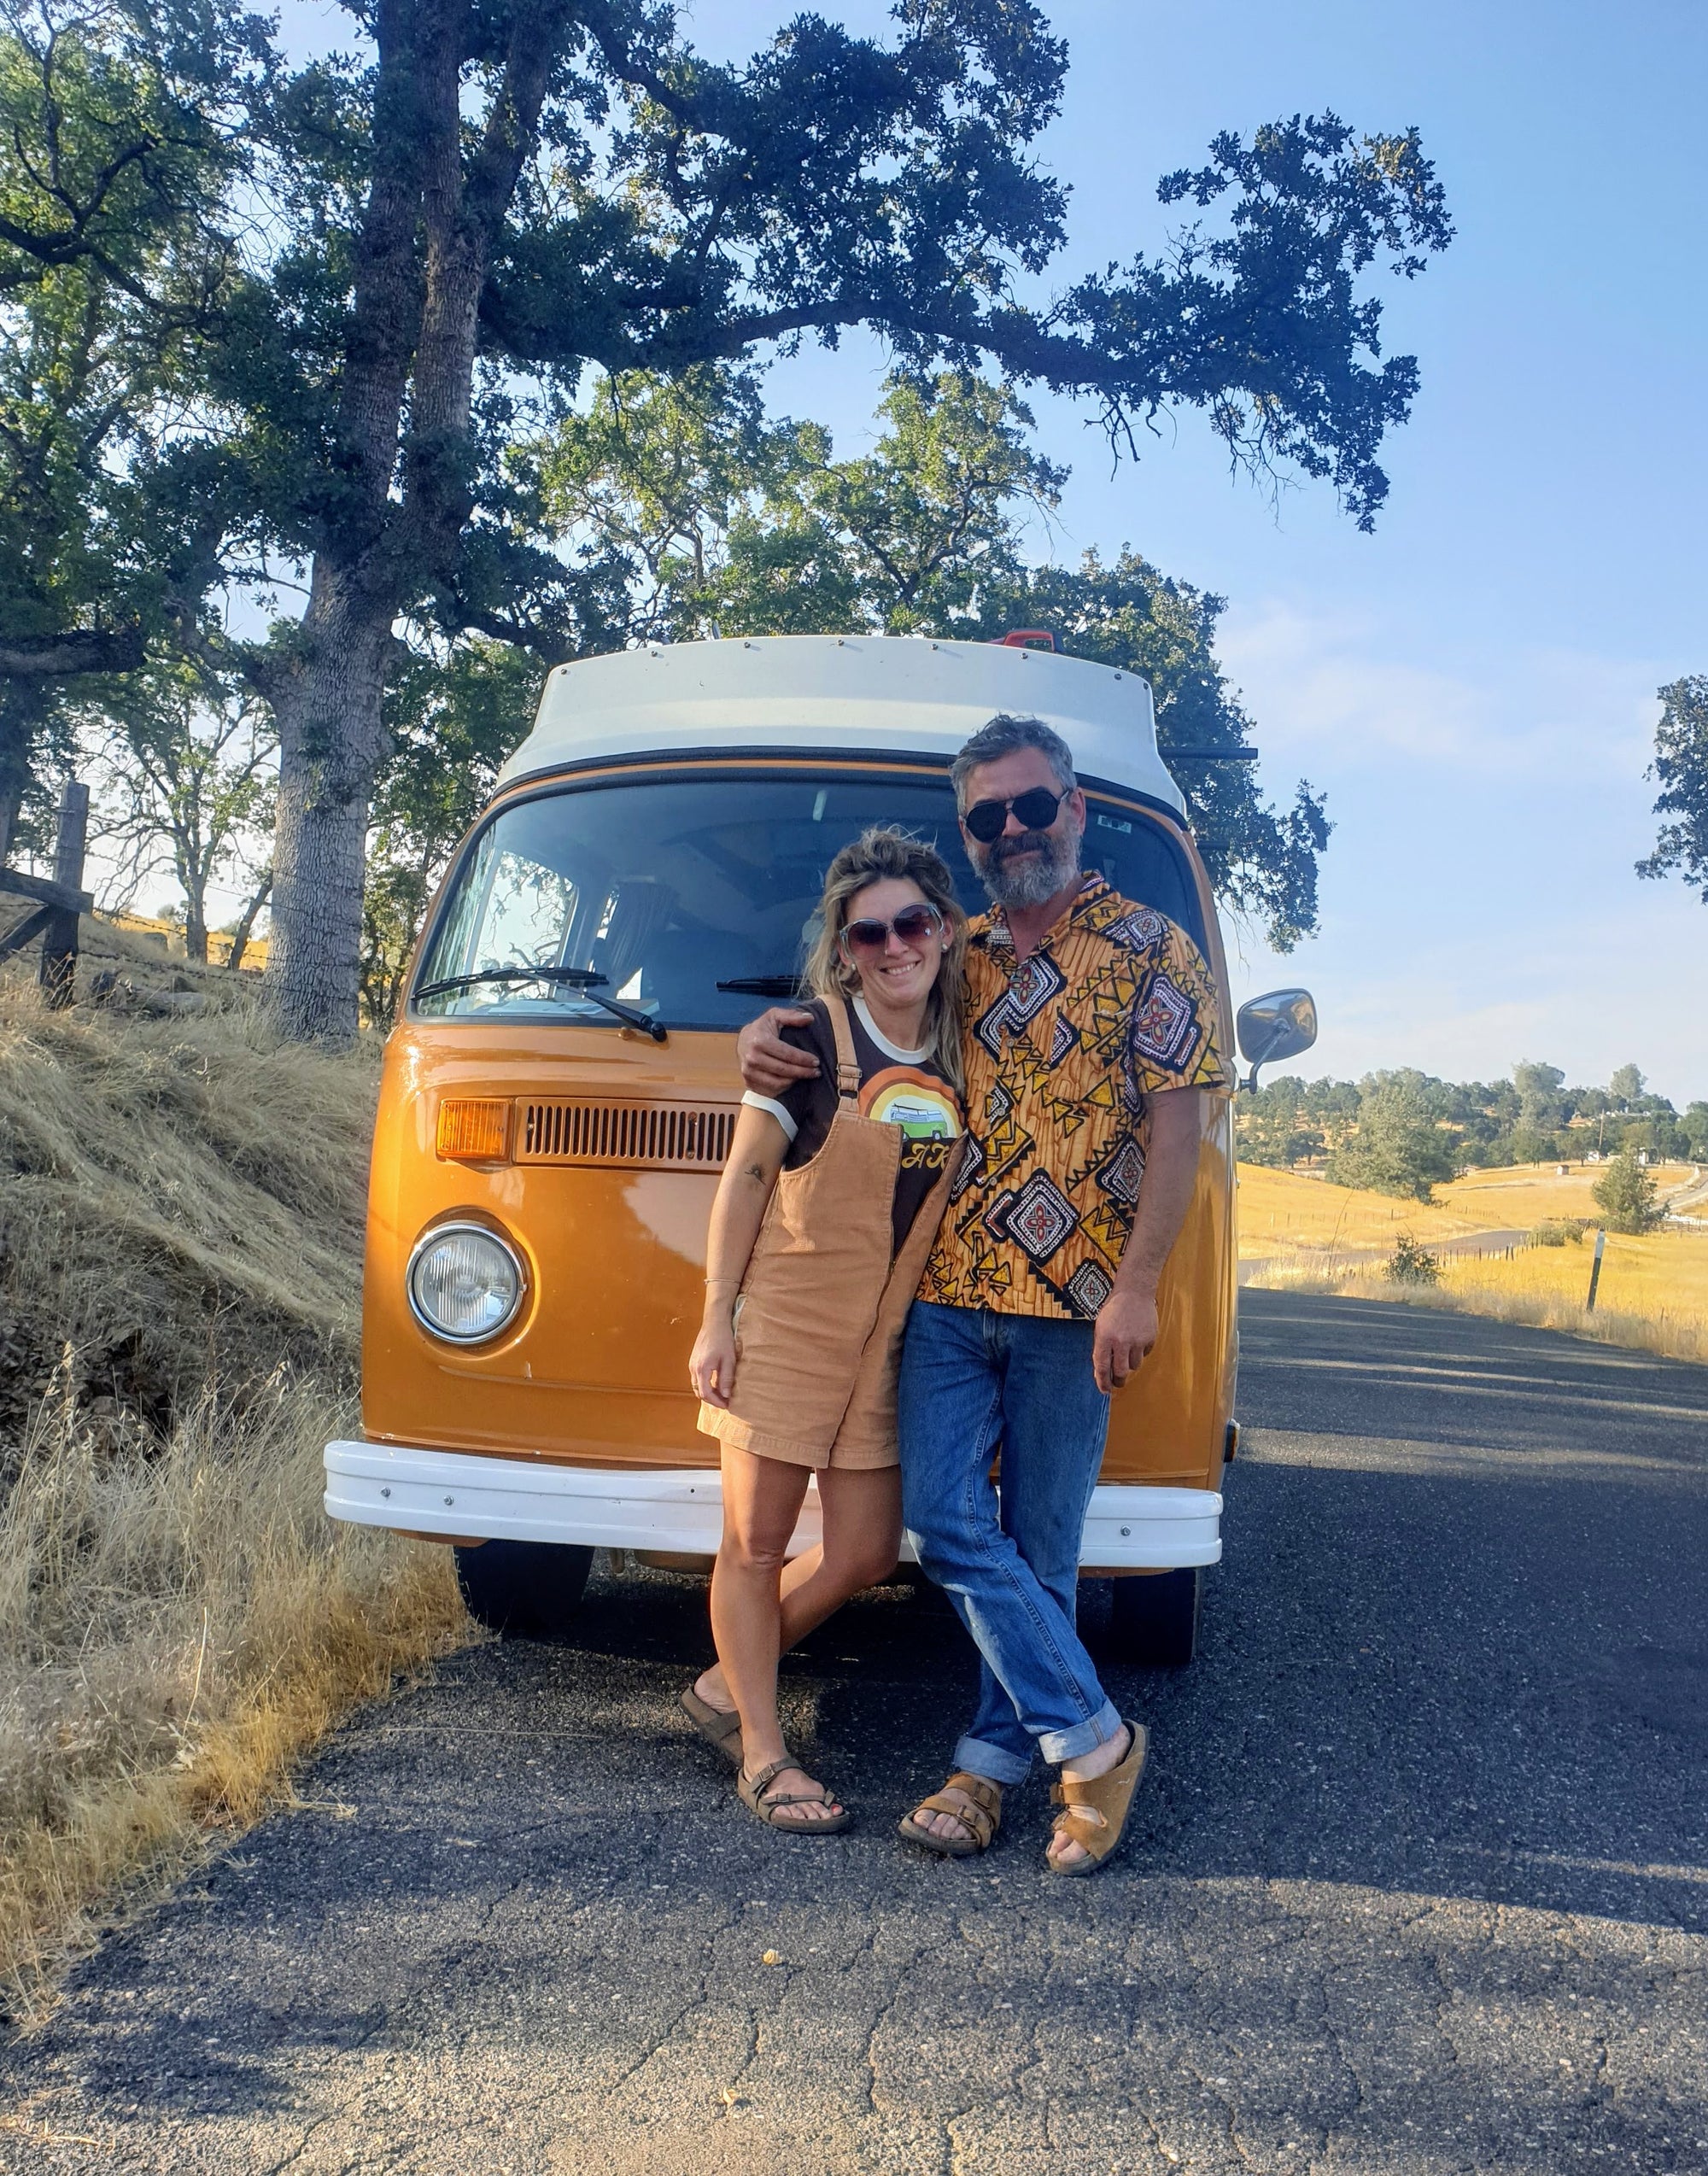 Mae took this on our way to Yosemite National Park.  We were so excited cruising in our kombi campervan bus.  